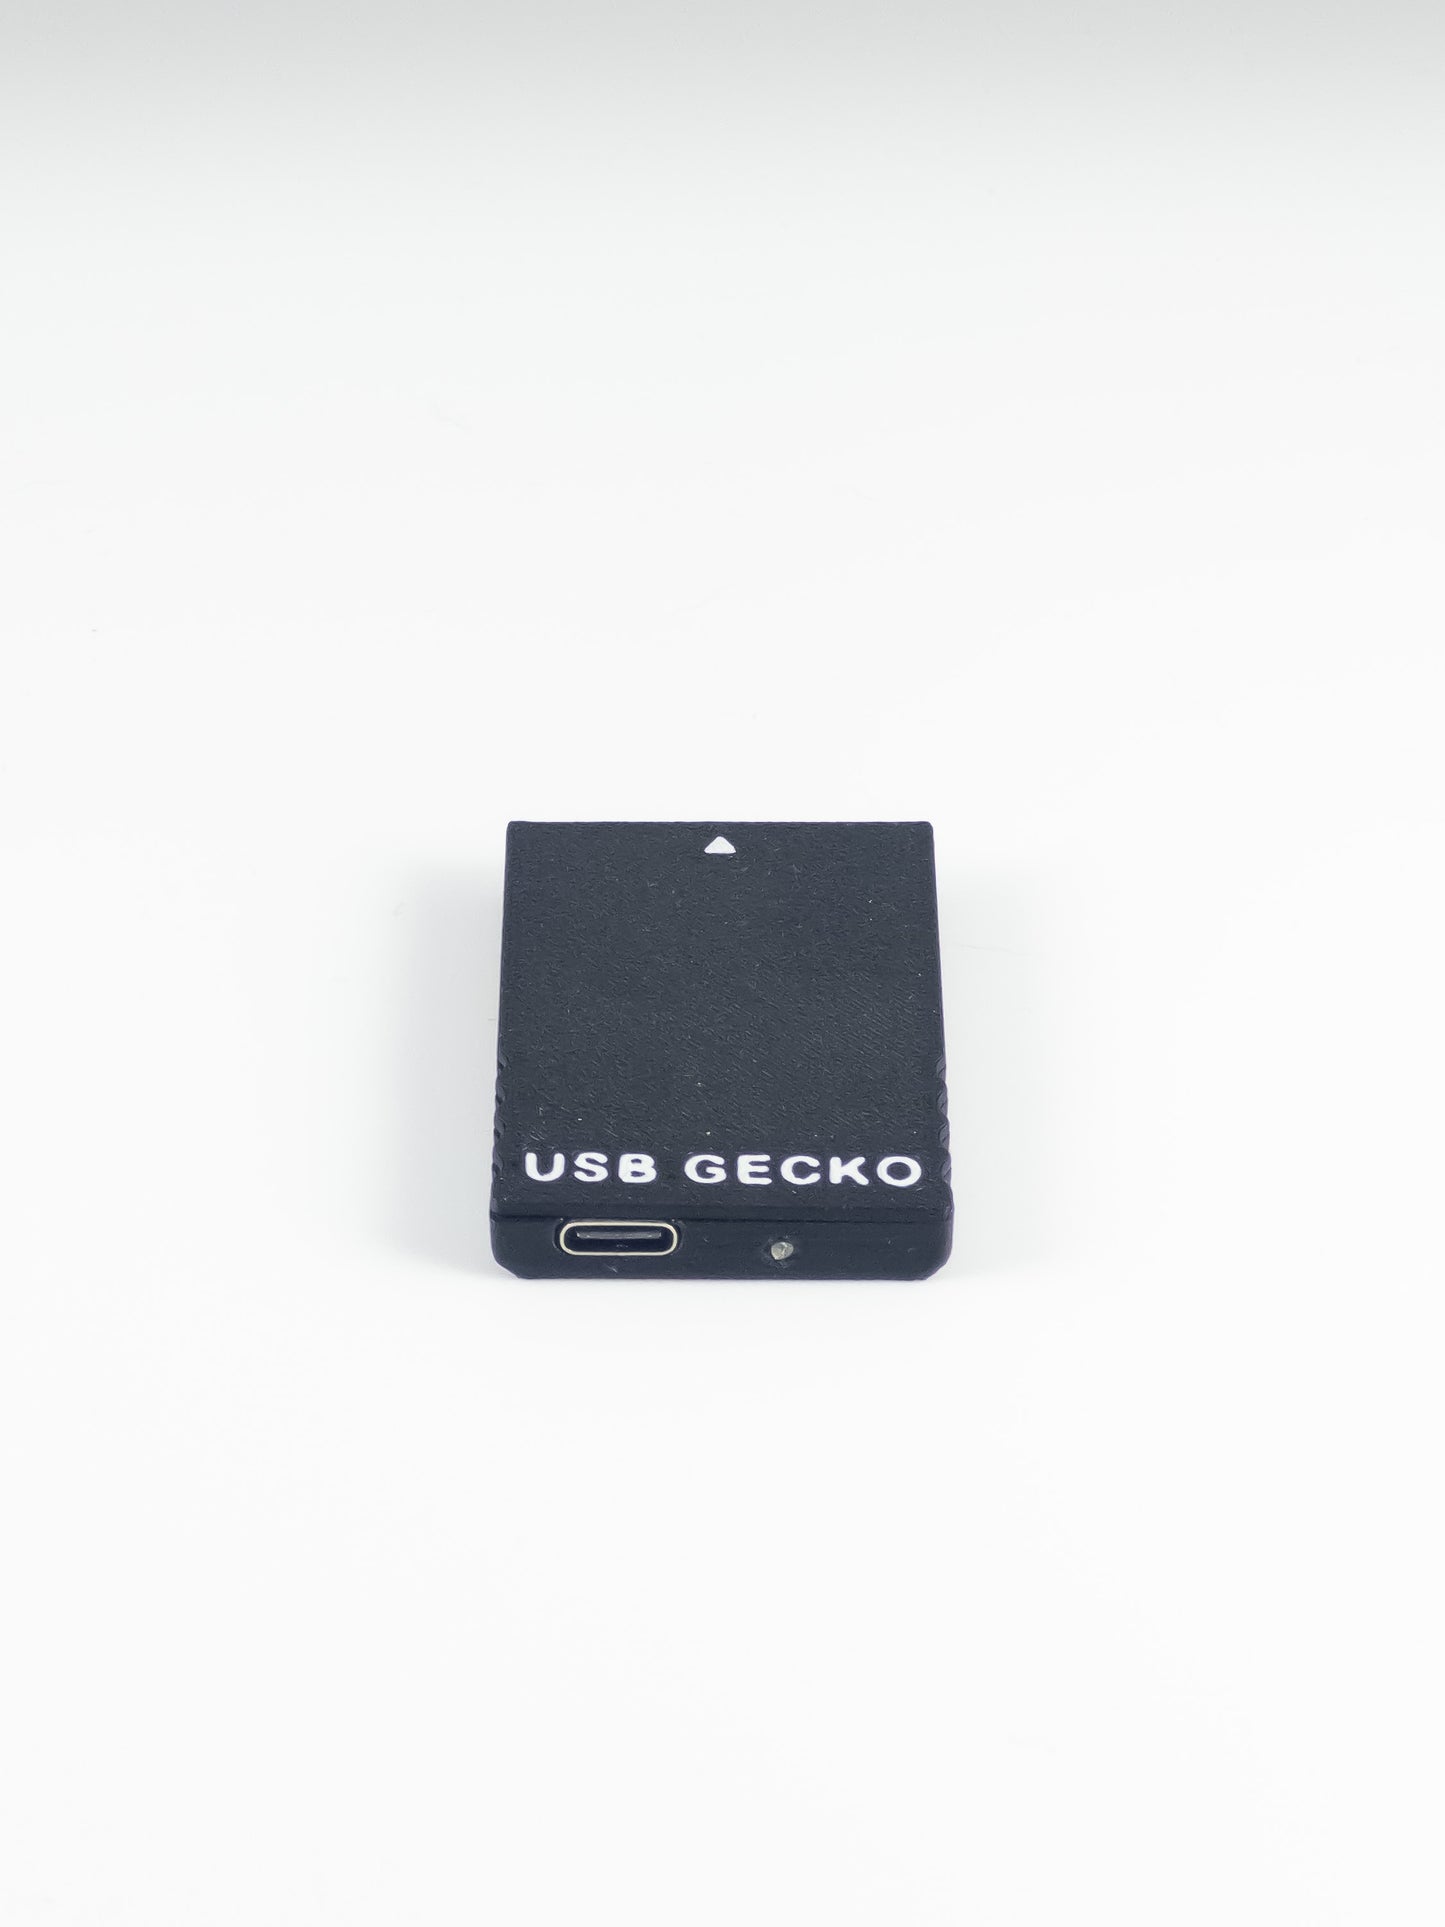 USB Gecko (Type-C) debugging tool for GameCube/Wii